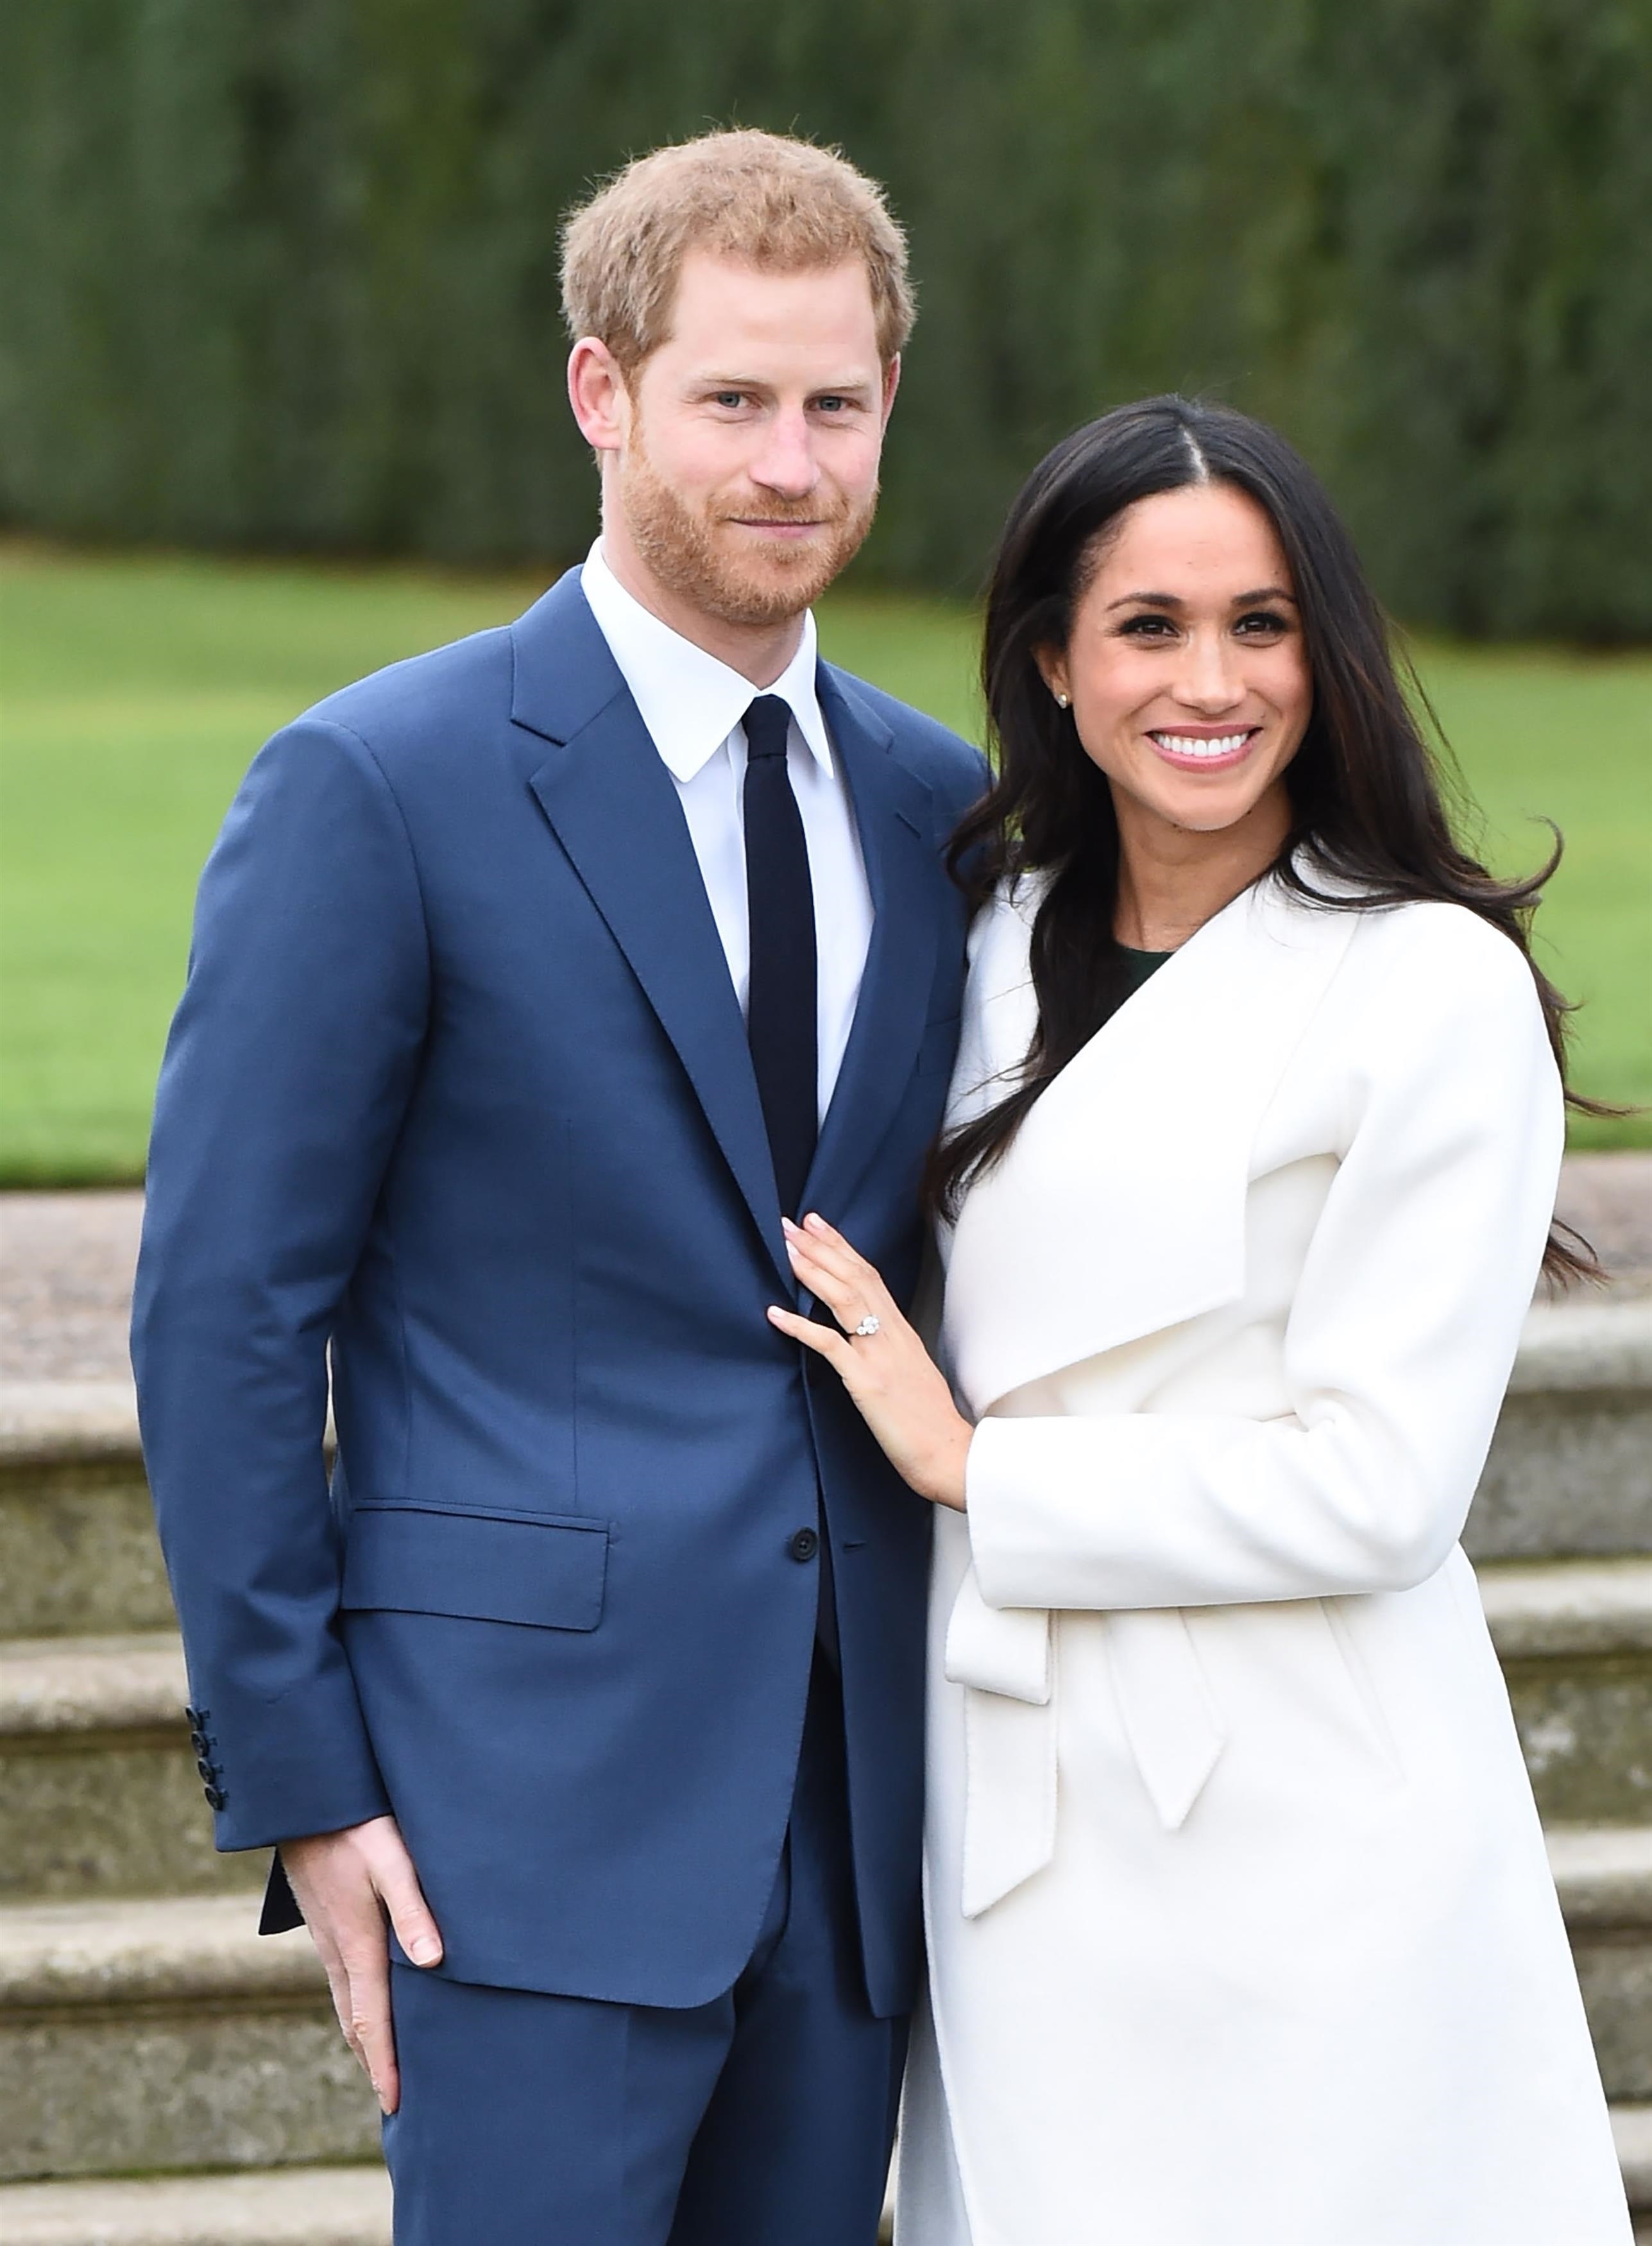 E!: Prince Harry is going to wear a wedding ring, unlike his older brother